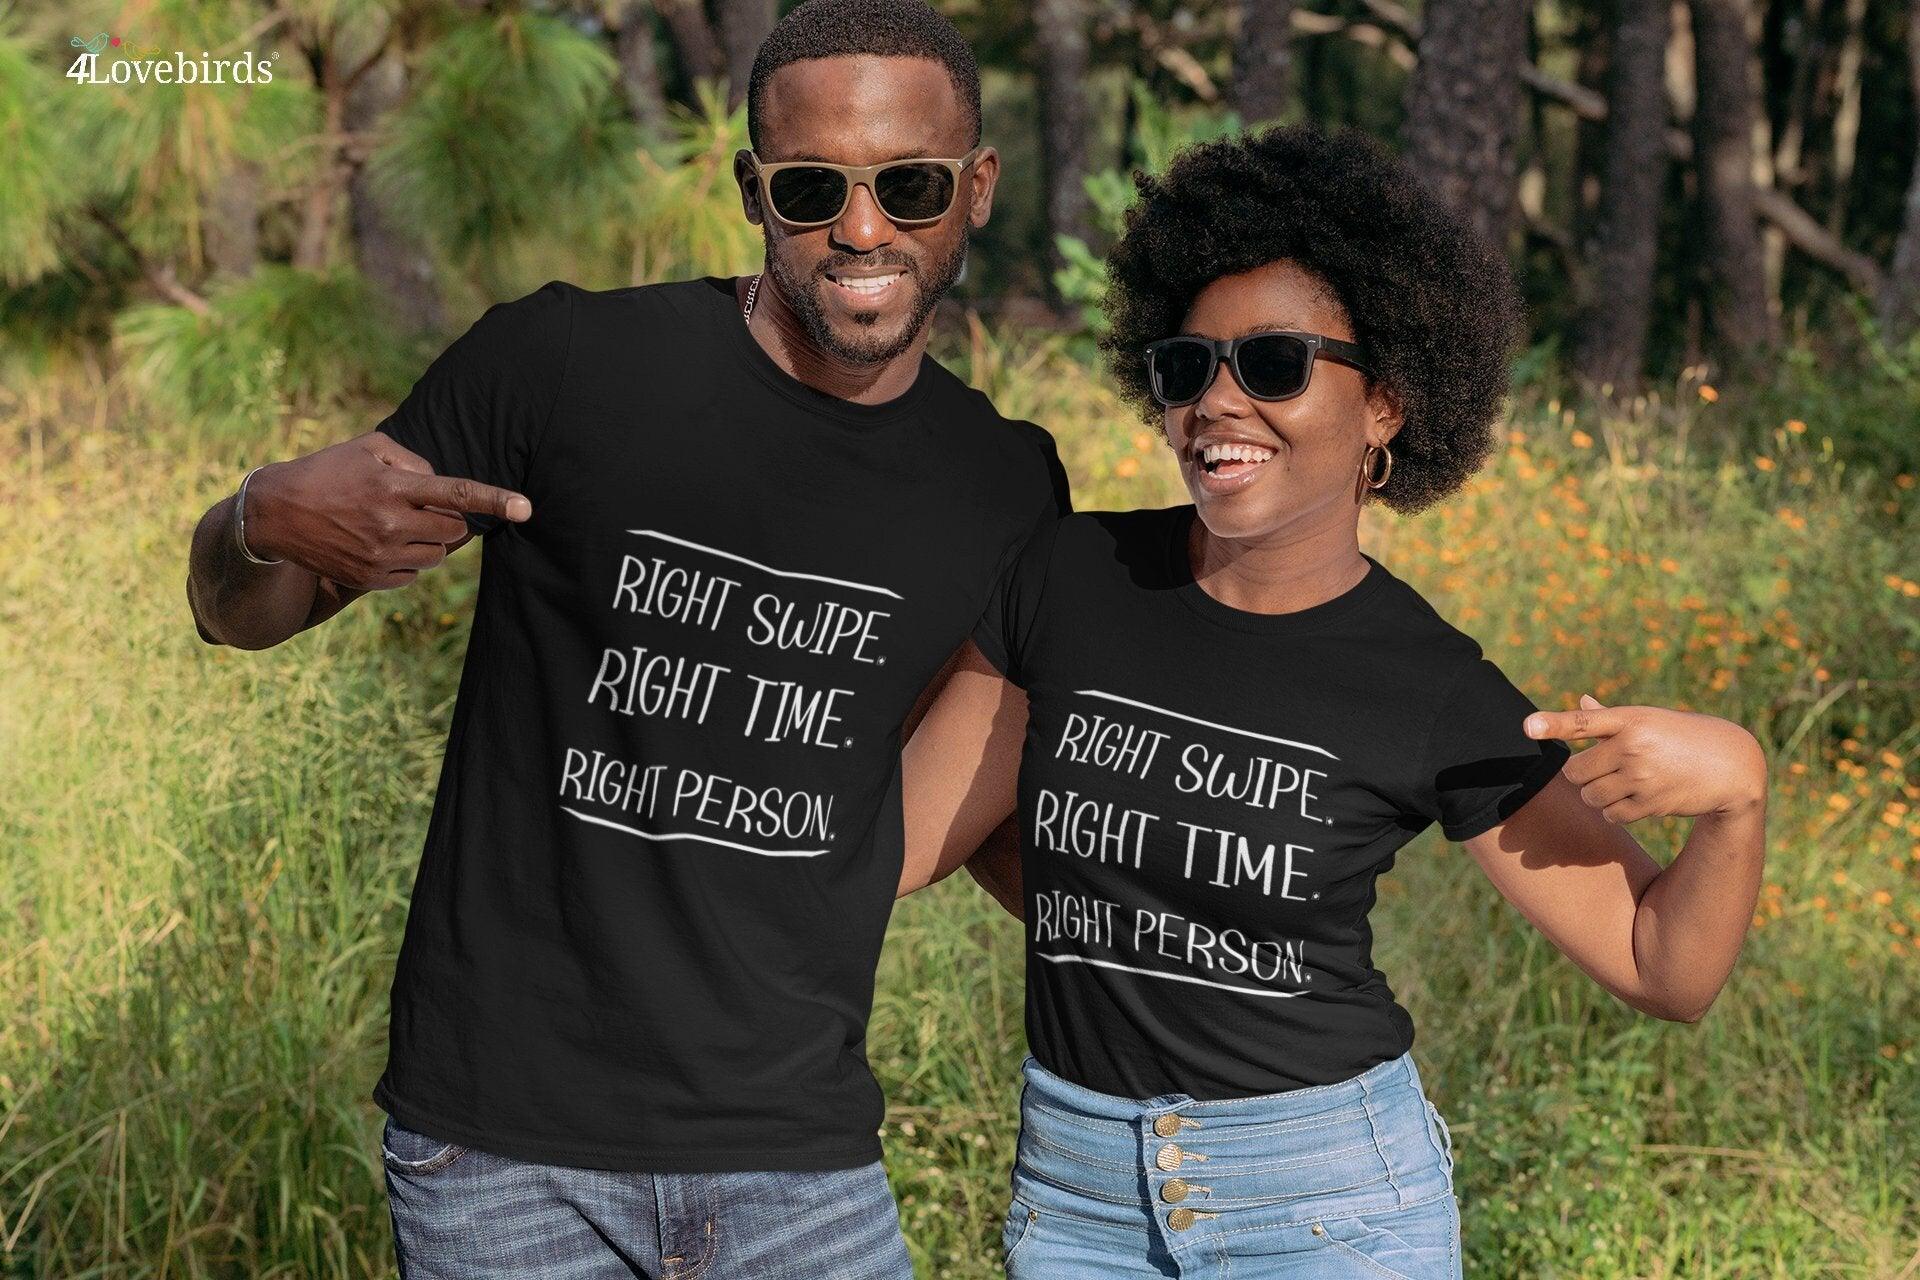 Right Swipe, Right Time | Tinder Couple T-Shirt | Dating App Couple Anniversary Gift Ideas - 4Lovebirds